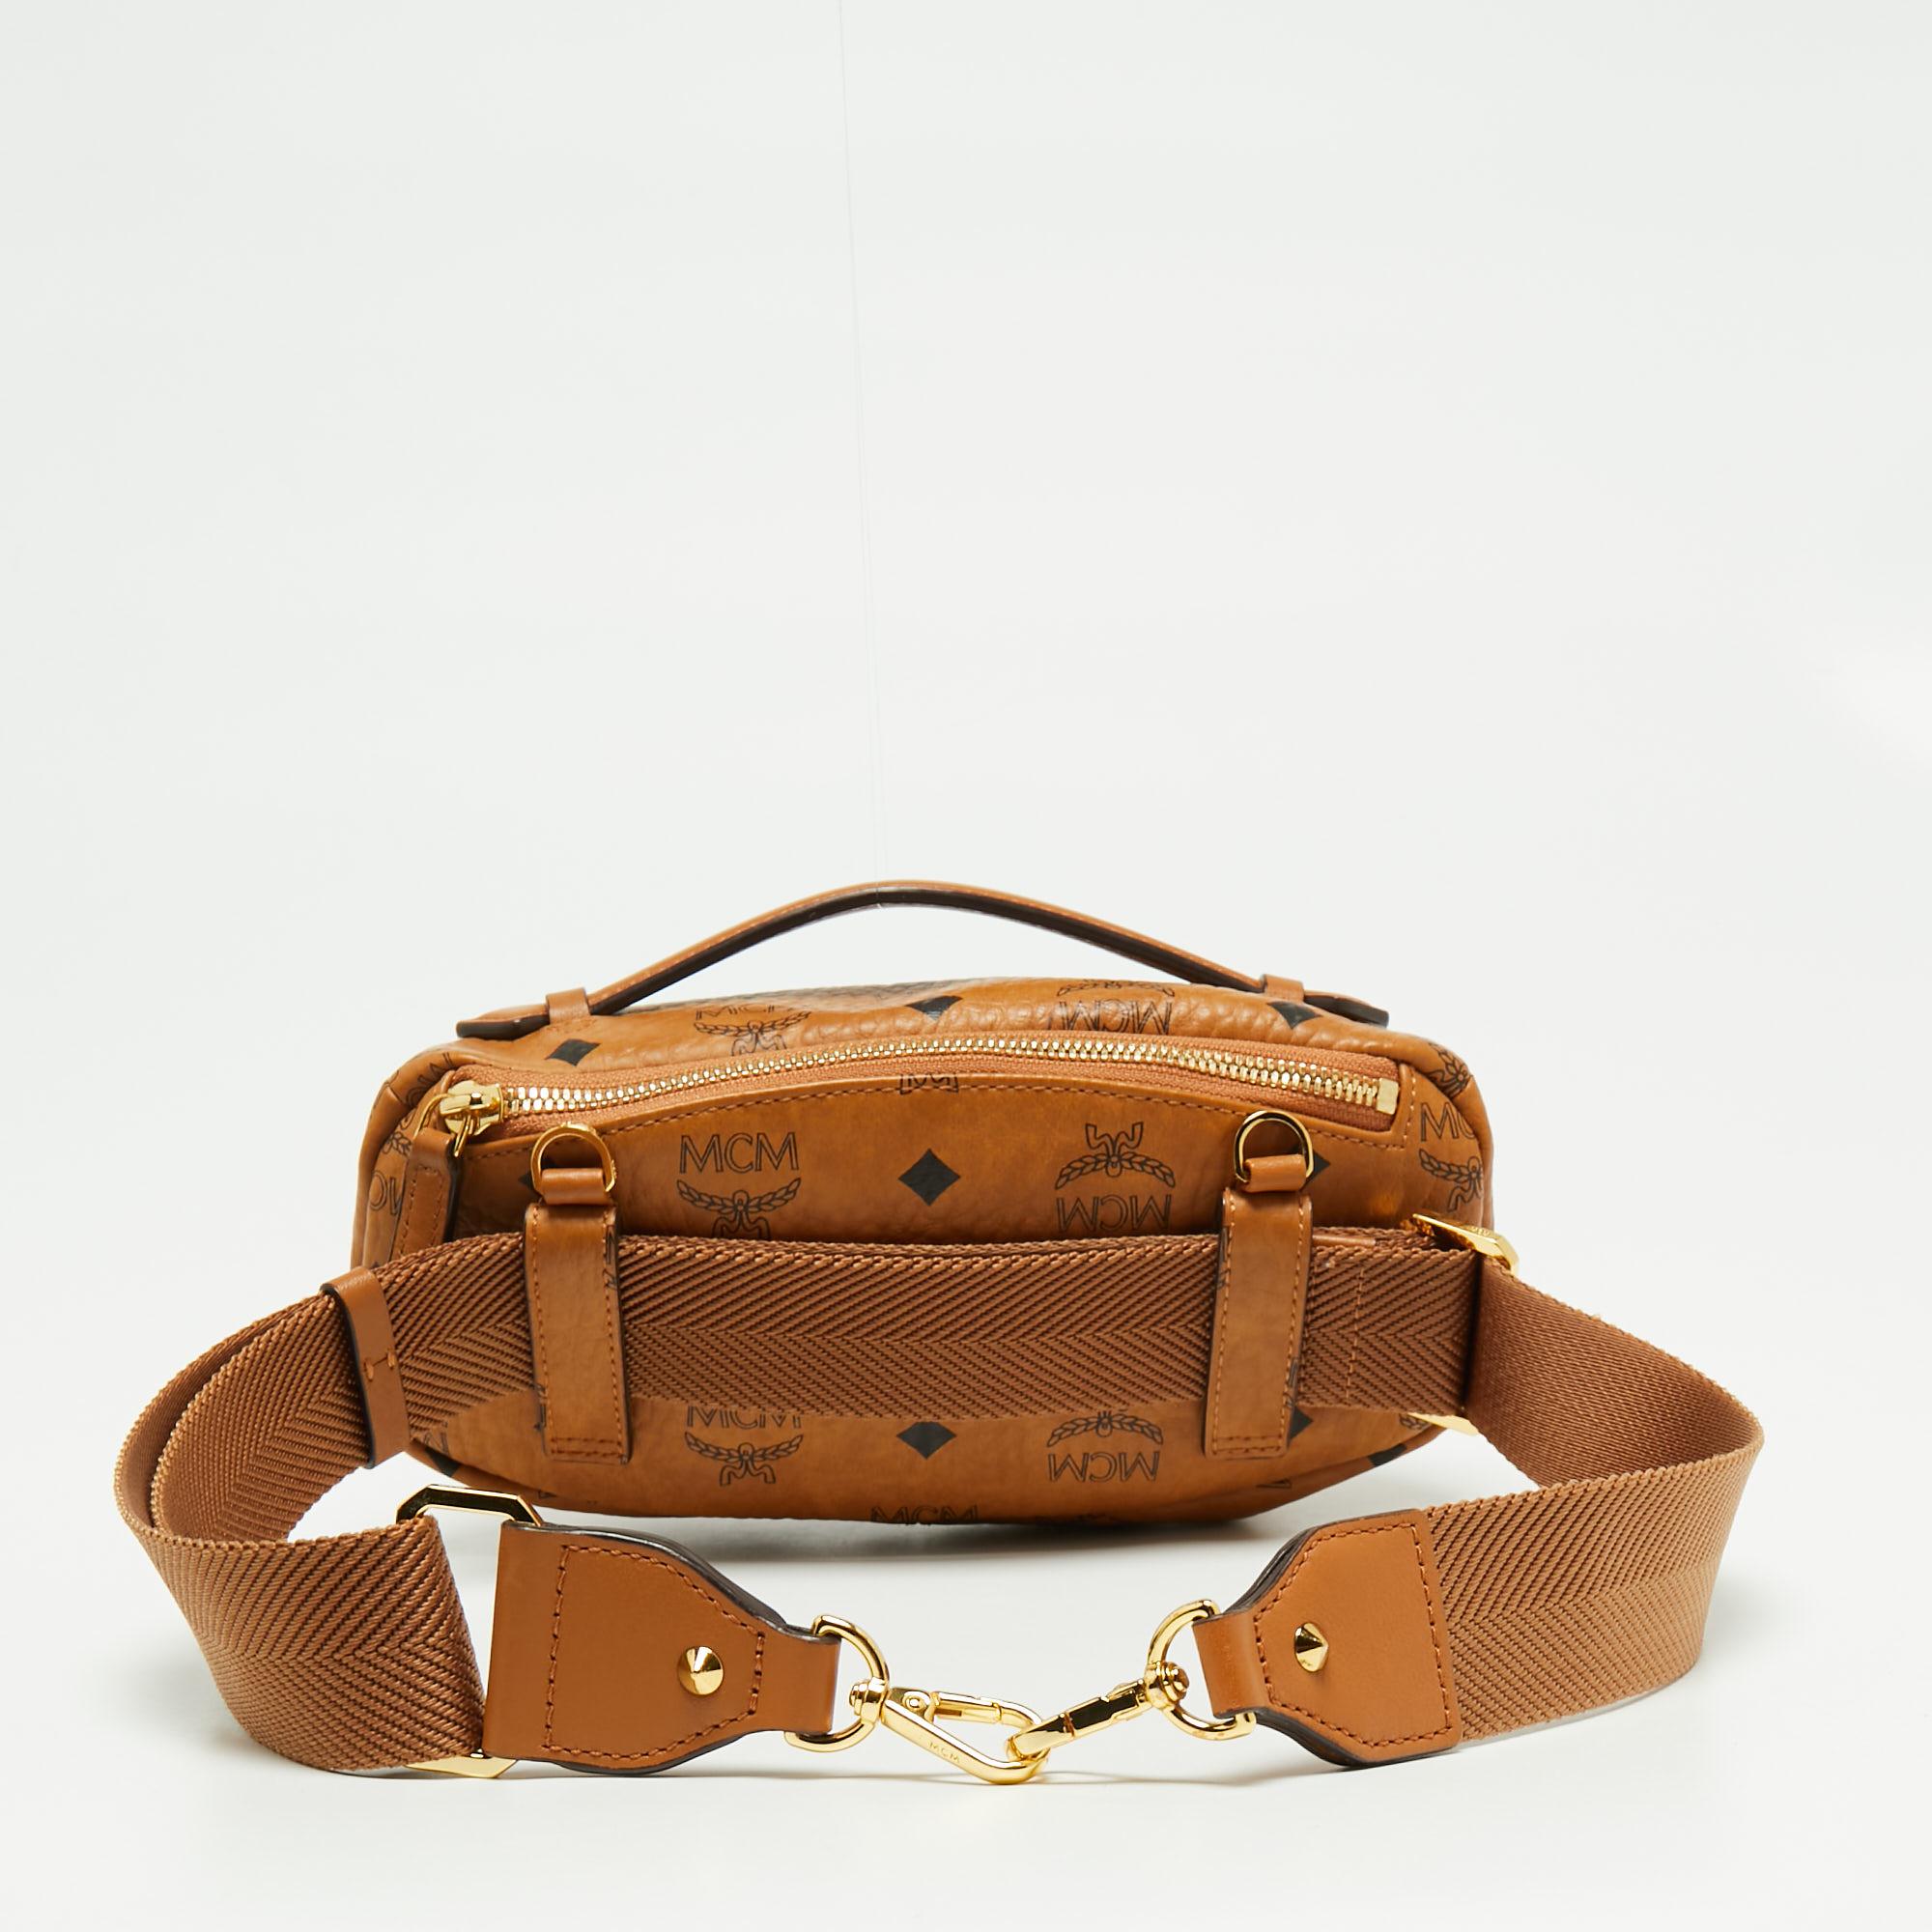 This MCM Cognac Visetos coated canvas belt bag for women highlights convenient style in the best way. The bag has gold-tone hardware accents, zip compartments, and an adjustable strap.

Includes: Original Dustbag, Original Box, Info Booklet,